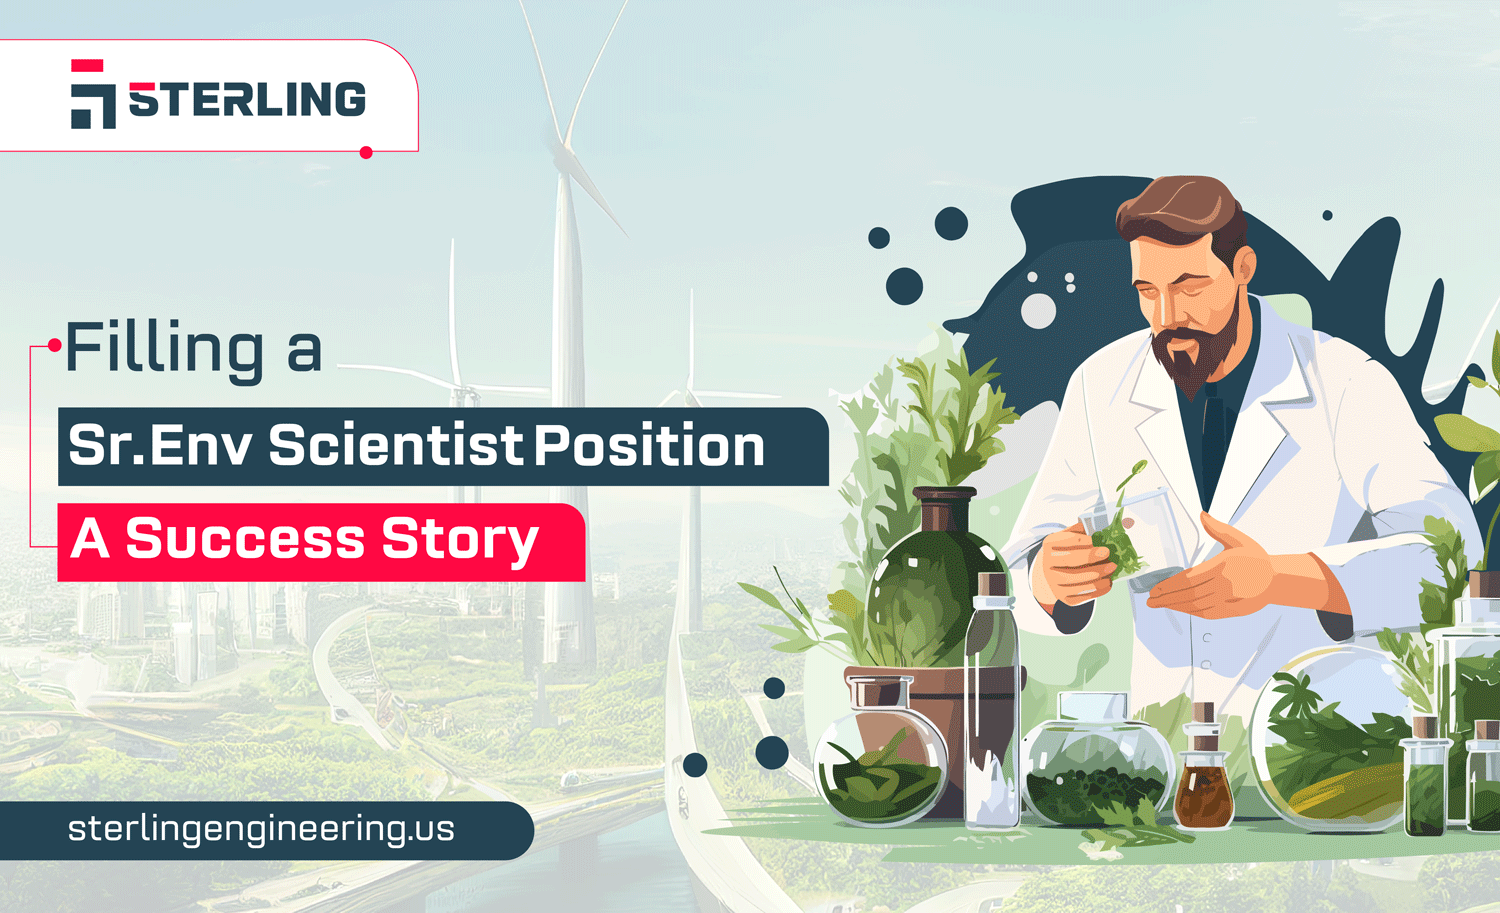 How We Helped Our Client Fill a Senior Environmental Scientist Position